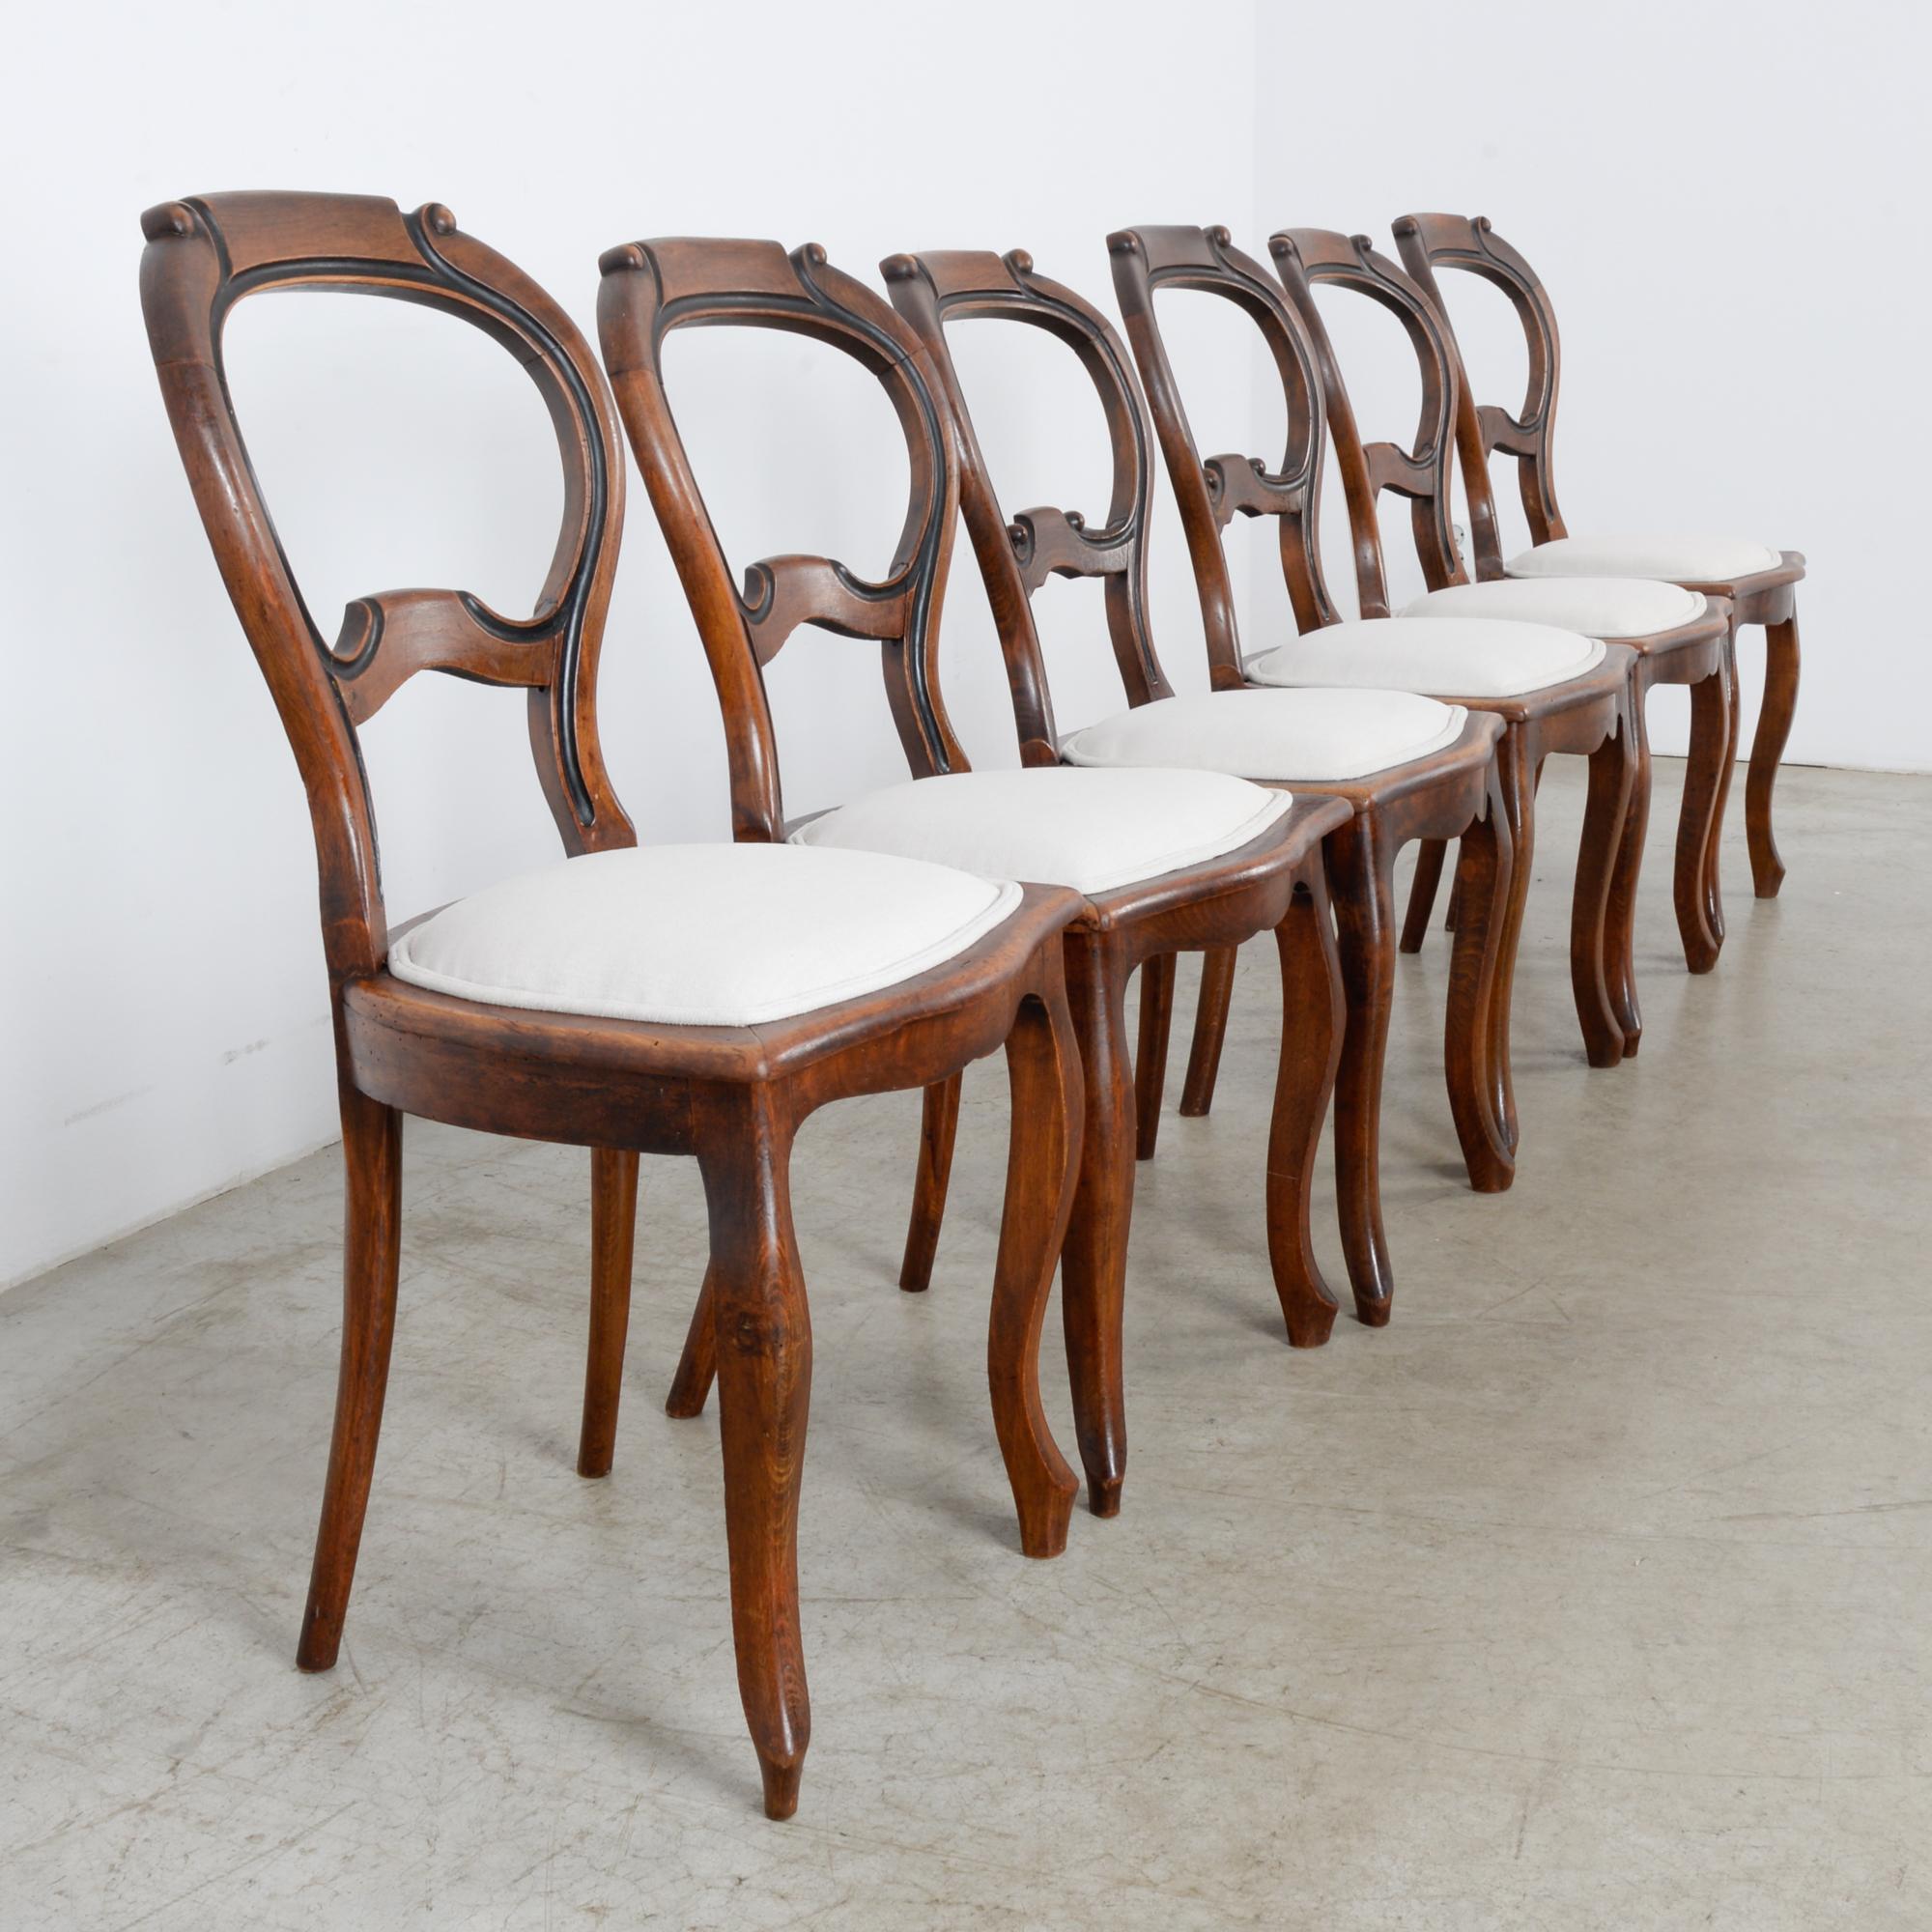 French Provincial 1900s Wooden Dining Chairs, Set of Six